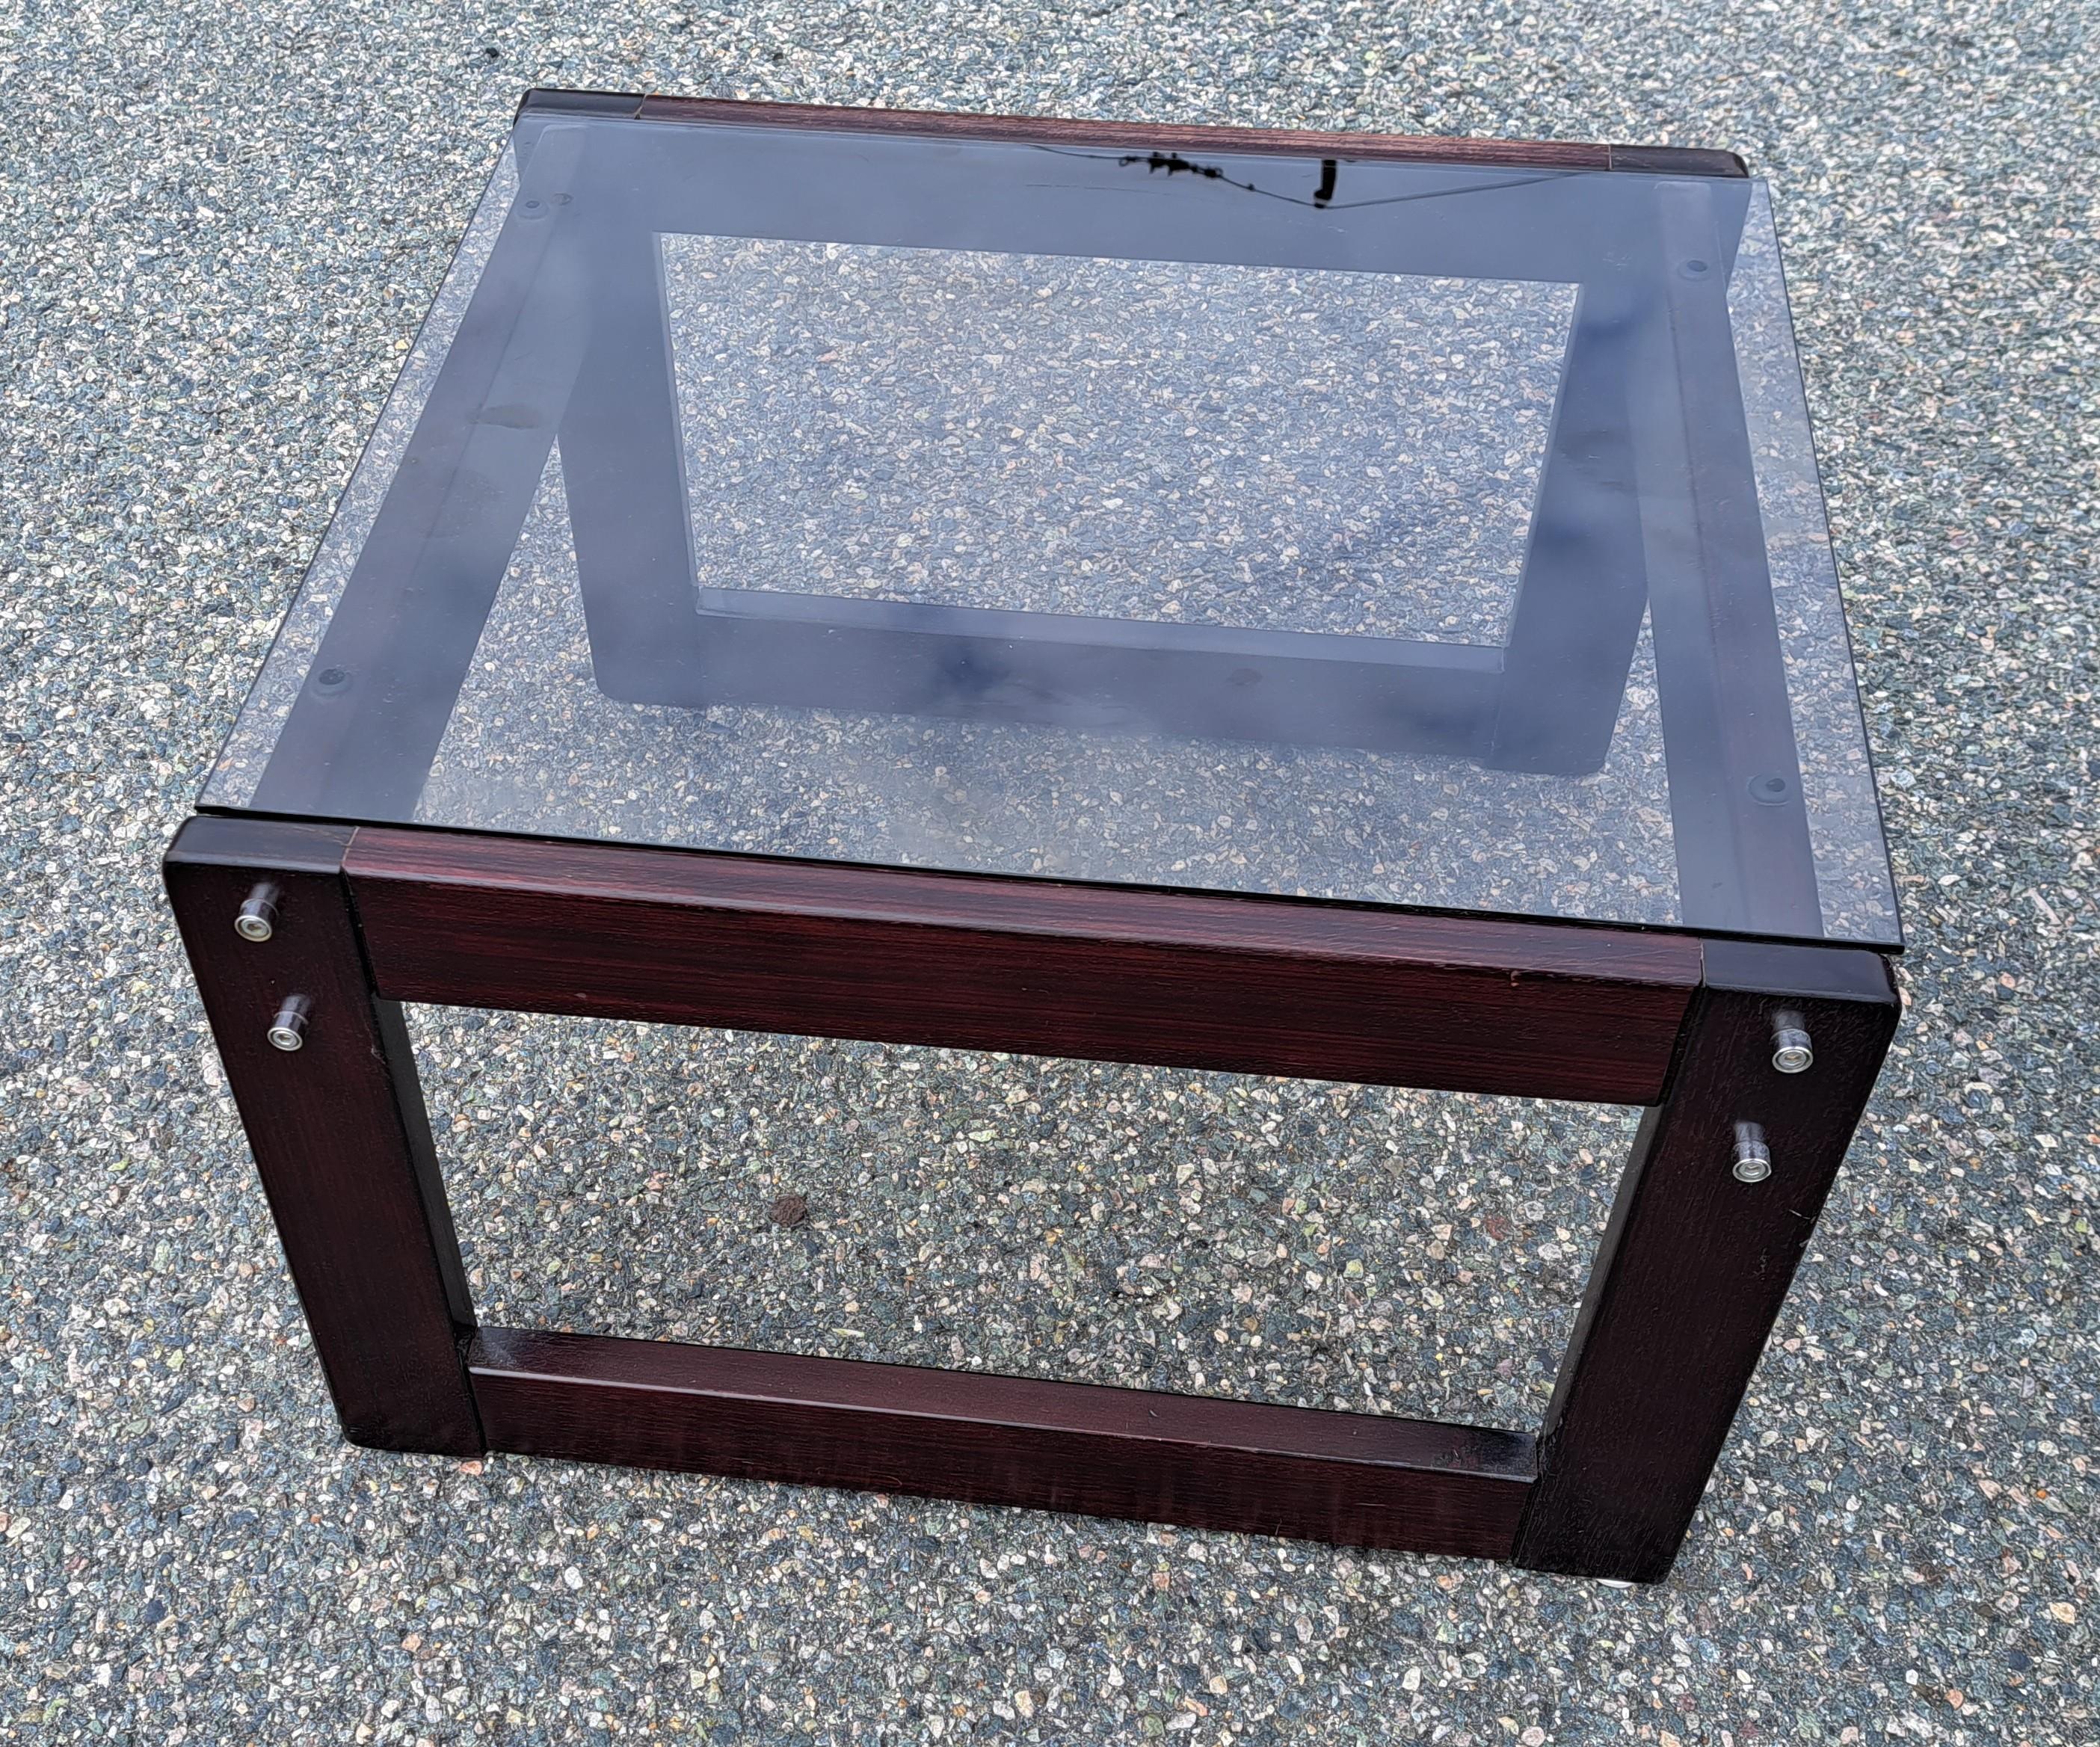 Pair of smoked glass top rosewood end tables. Tables are attributed to Percival Lafer. With protruding bolts against smooth red wood base. Convenient size and minimal design make these tables perfect for small or large spaces. 